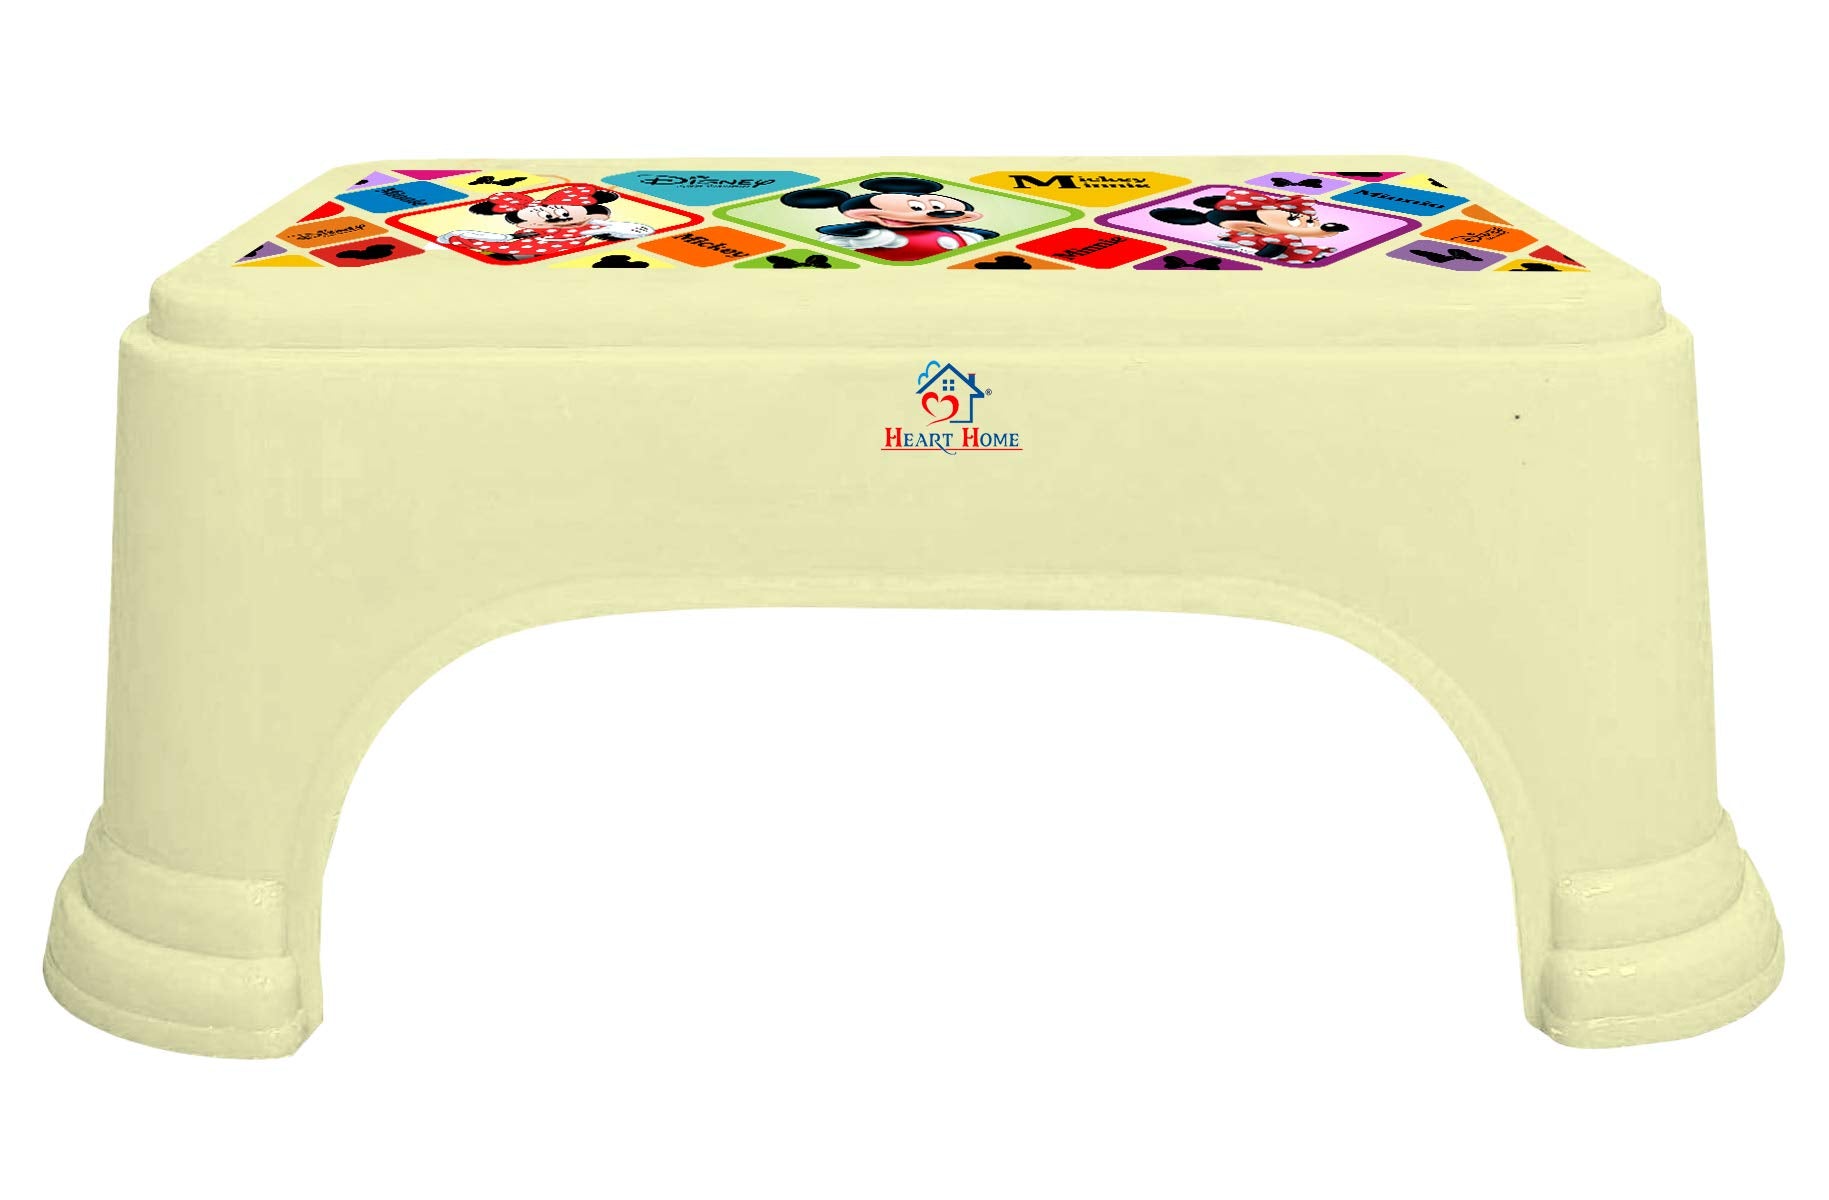 Heart Home Disney Mickey Minnie Print Square Plastic Bathroom Stool, Adults Simple Style Stool Anti-Slip with Strong Bearing Stool for Home, Office, Kindergarten (Cream) -HS_35_HEARTHS17700